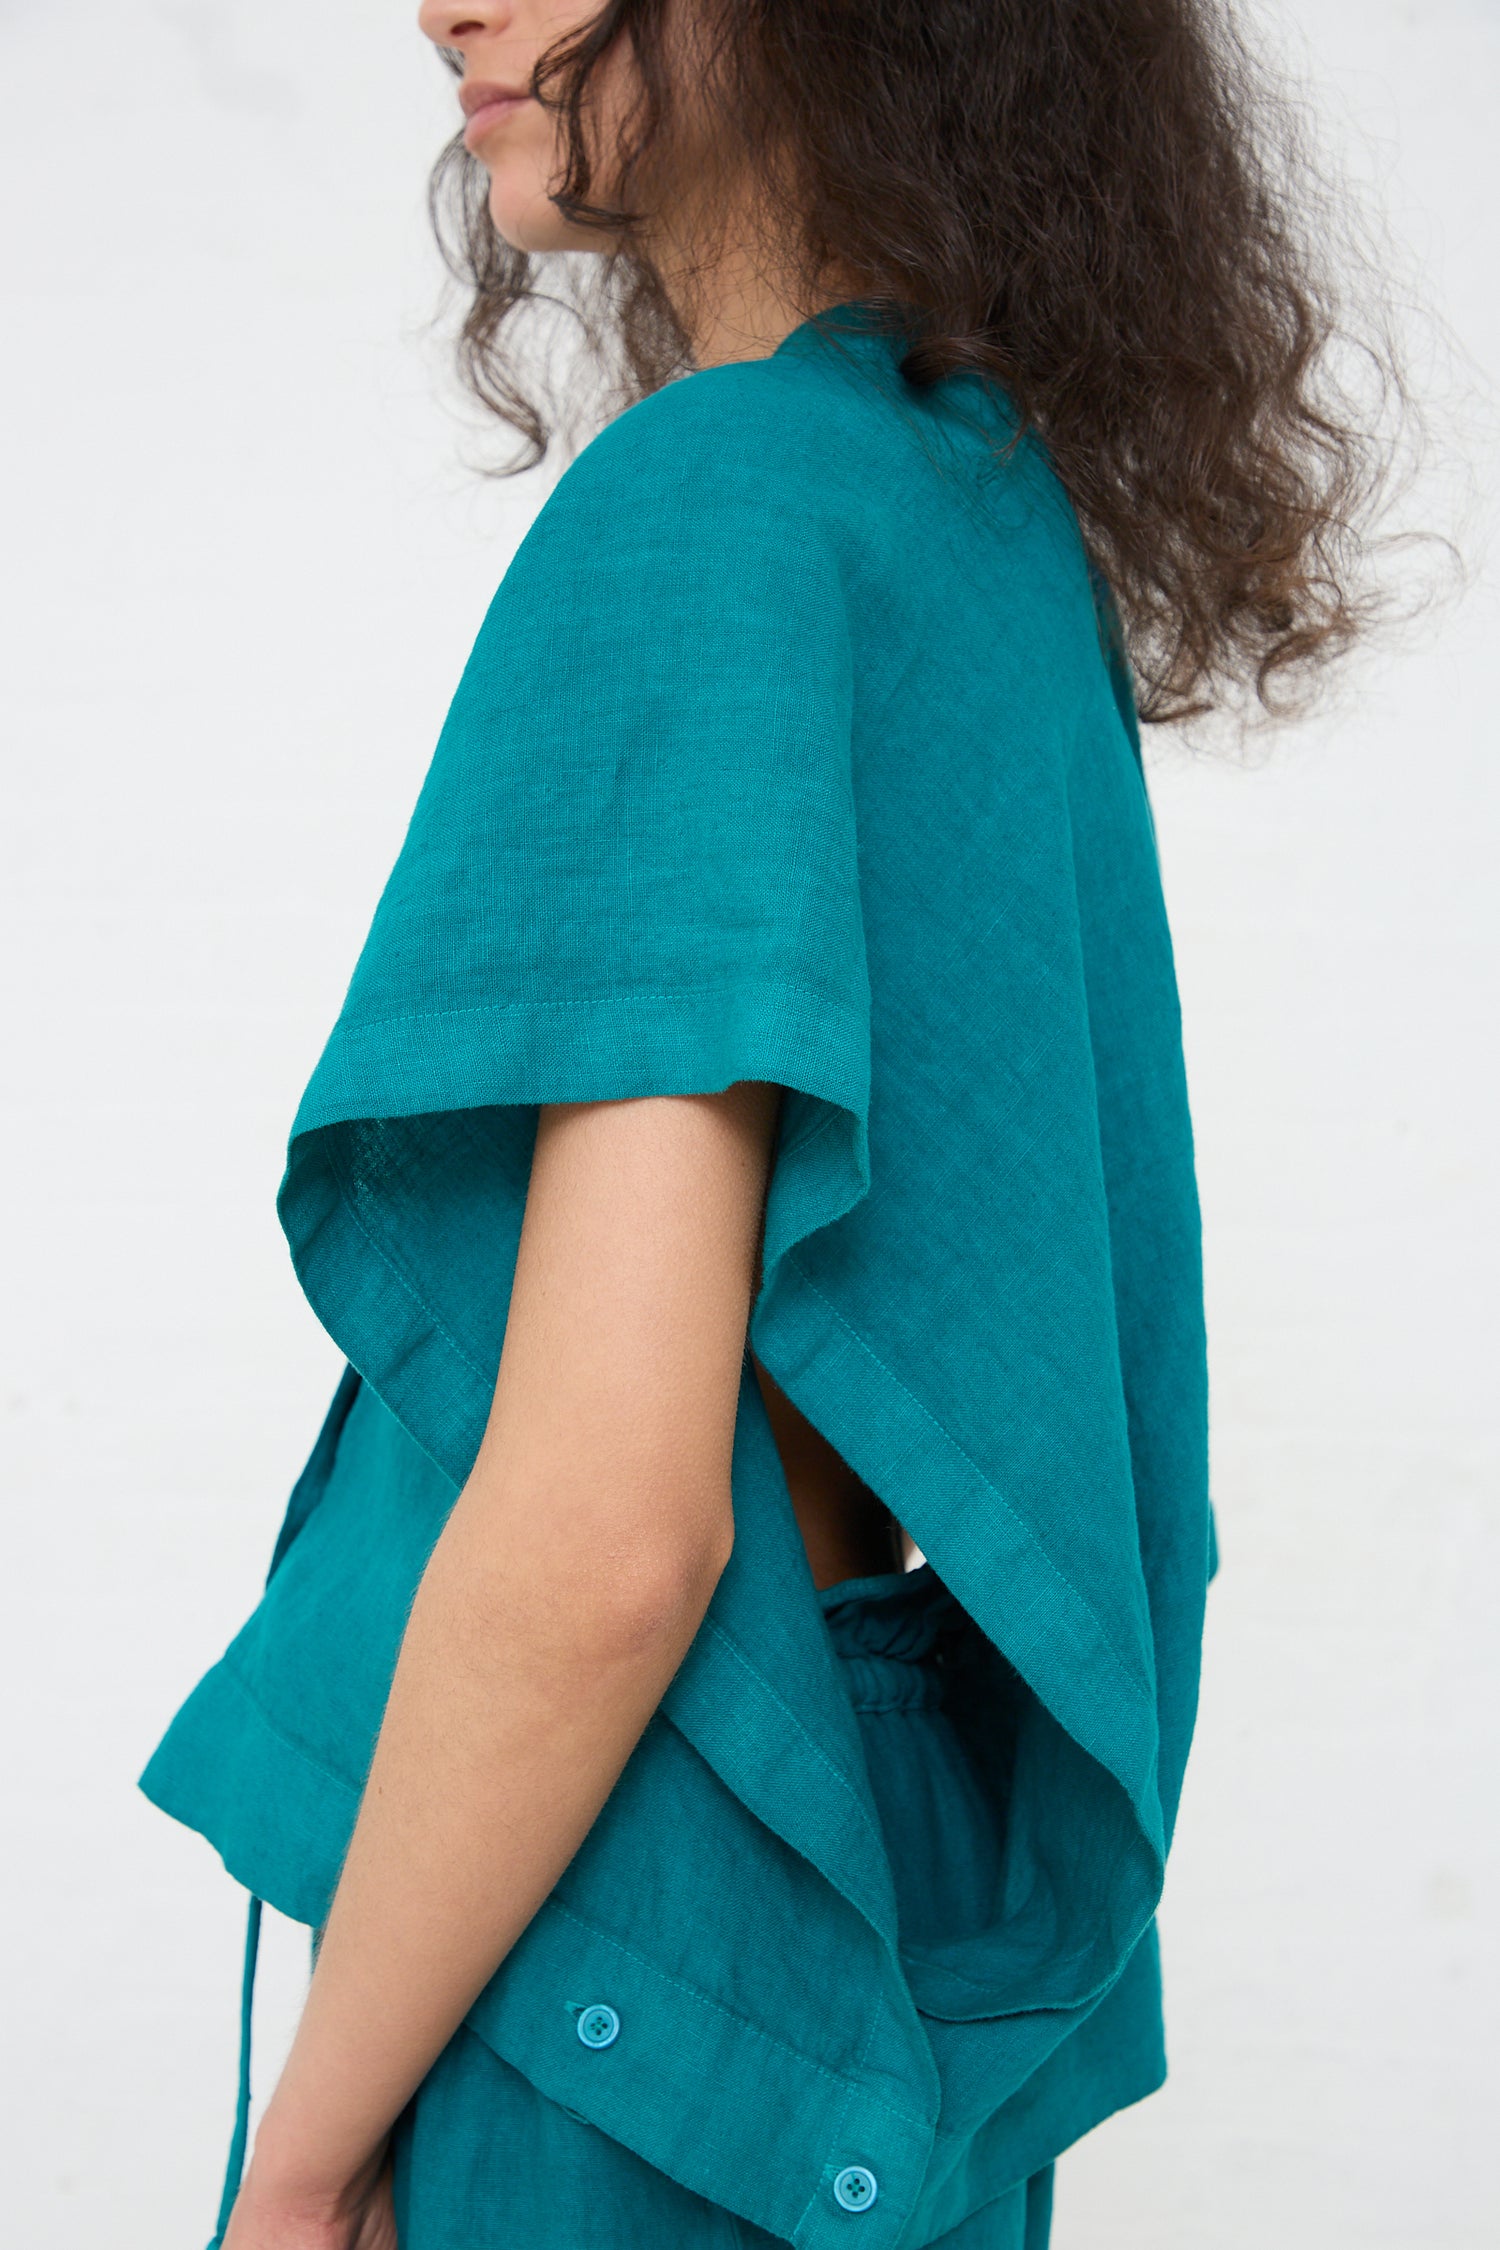 A woman standing in profile, wearing a Linen Origami Top in Peacock by Black Crane, with a boxy fit, the back partly open and button details, against a white background.